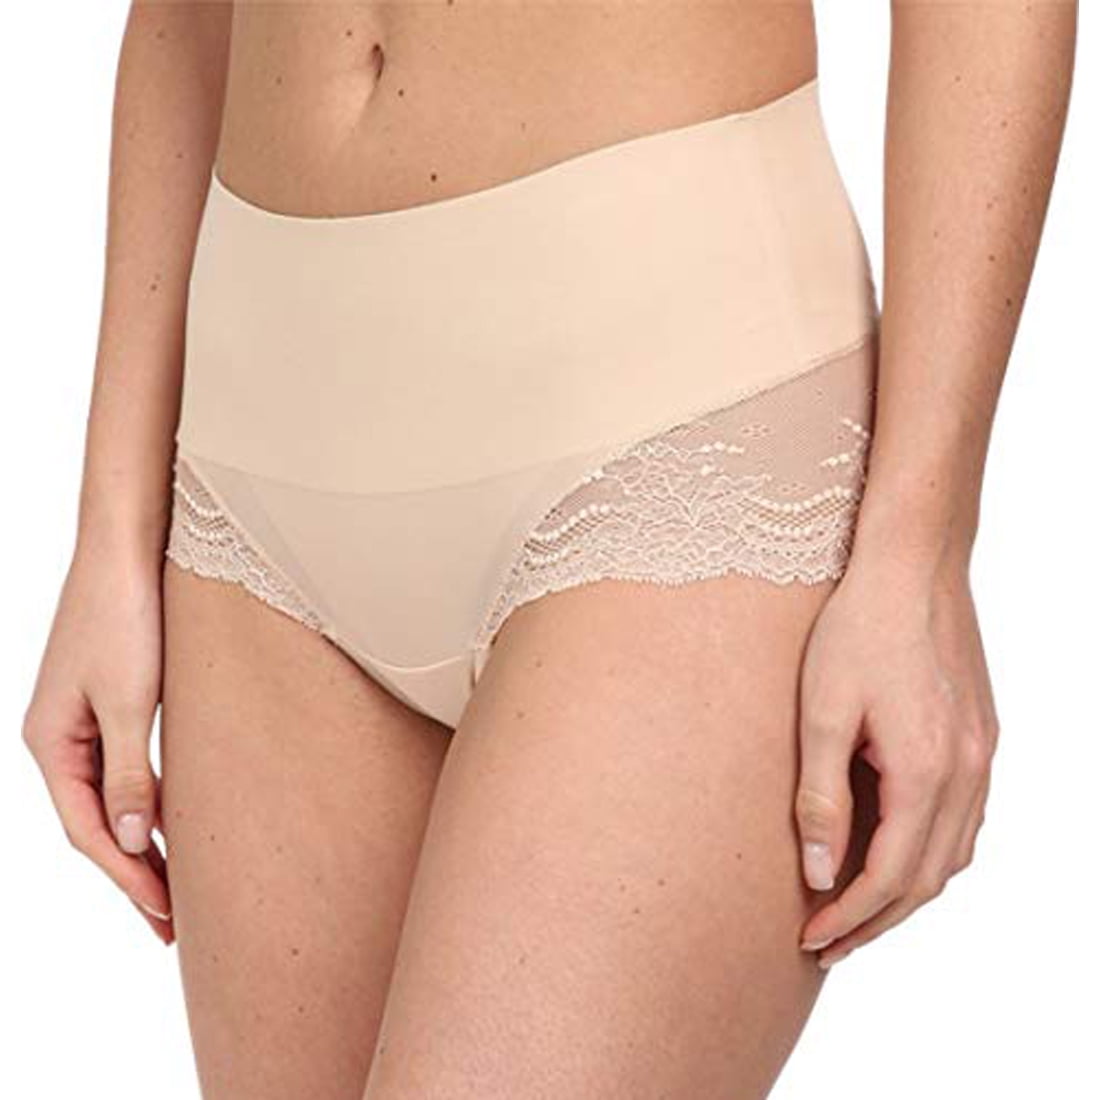 Spanx Undie-tectible Lace Hi-Hipster Panty Black – Belle Mode Intimates